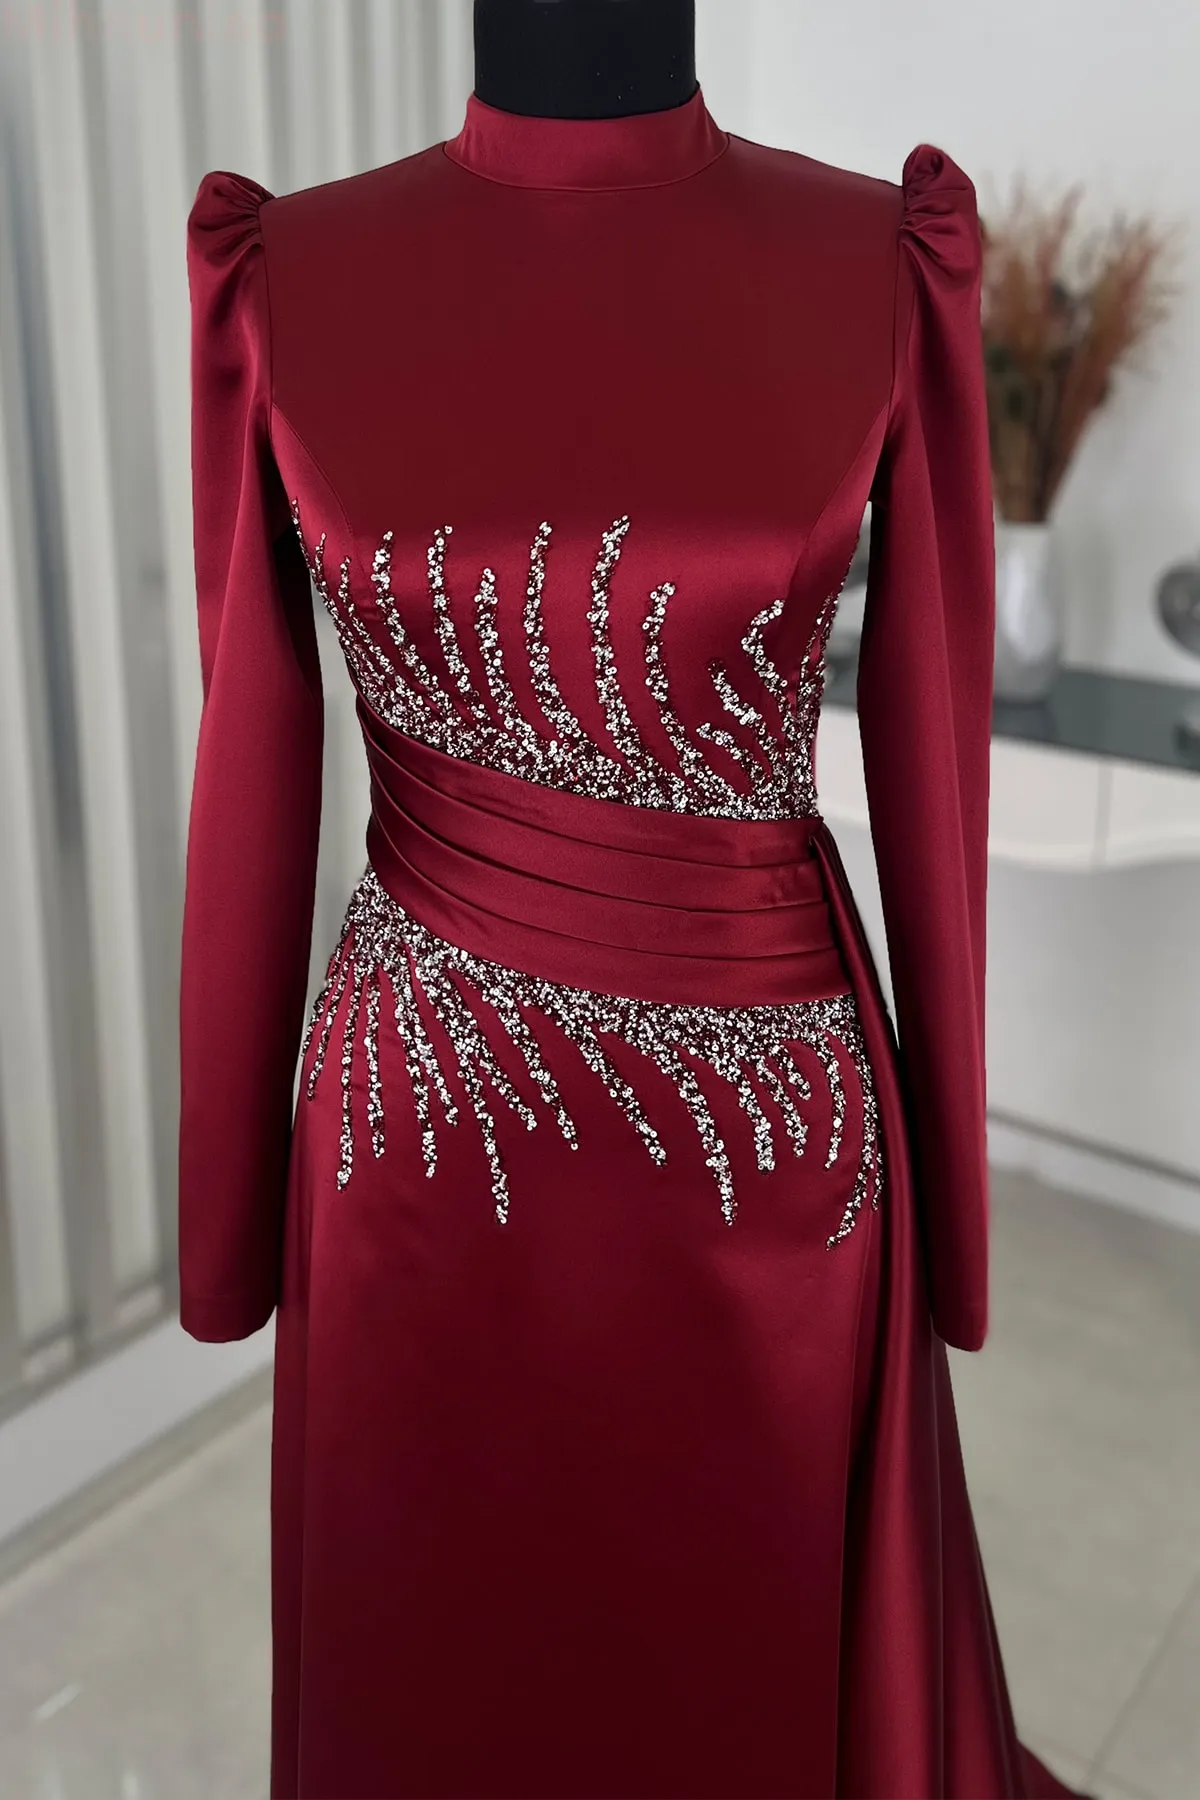 Leyla Satin Tail Detail Stone Evening Dress Modest Hijab Clothing -  Burgundy - Shop of Turkey - Buy from Turkey with Fast Shipping